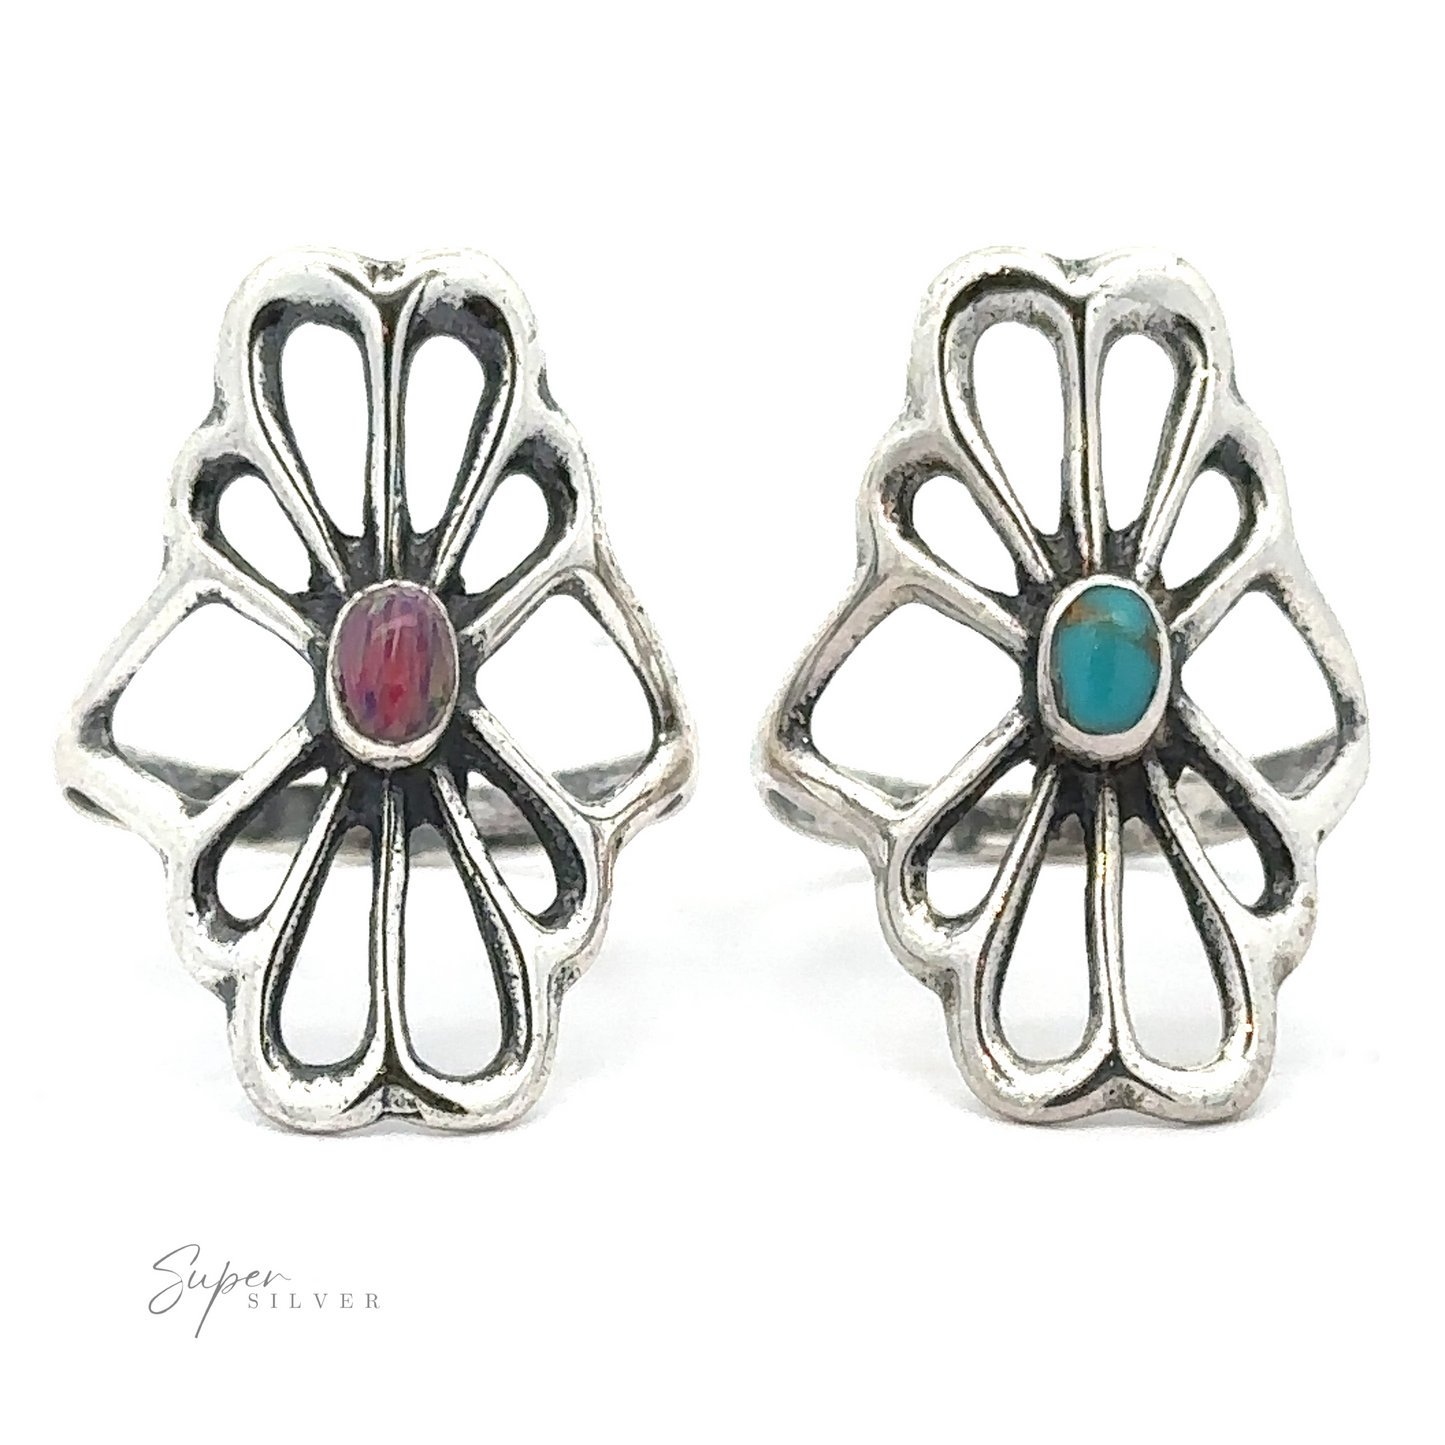 
                  
                    Two American Made Flower Rings each feature ornate floral patterns with a central oval gemstone, one purple and the other turquoise. Handcrafted in America, they proudly display the "Super Silver" logo in the lower left corner.
                  
                